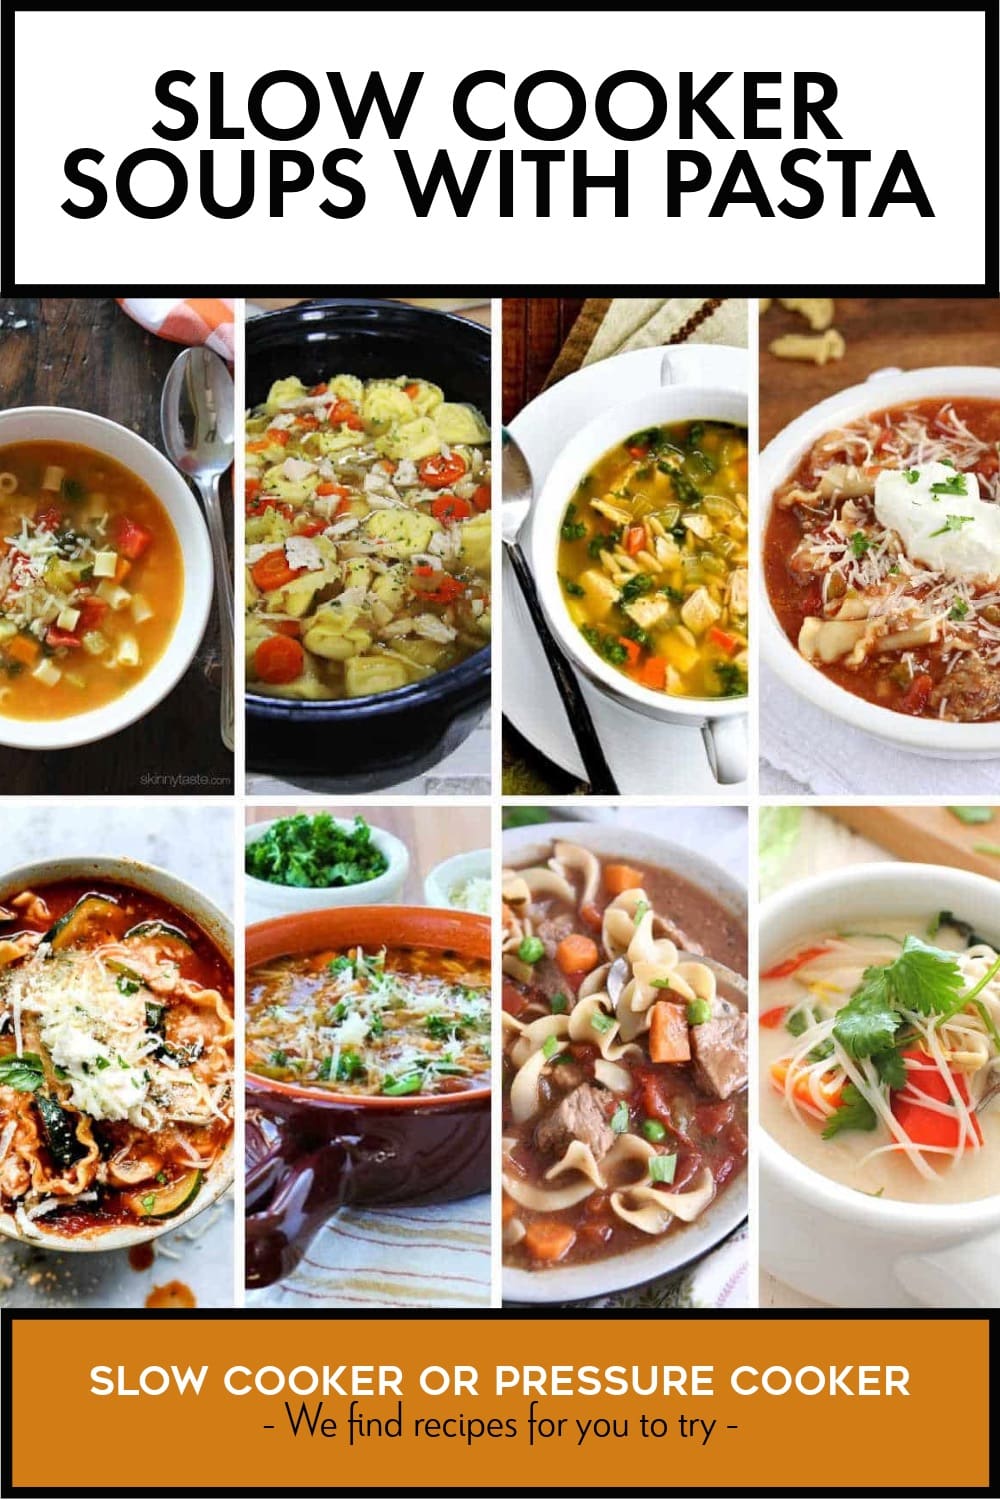 Pinterest image of Slow Cooker Soups with Pasta